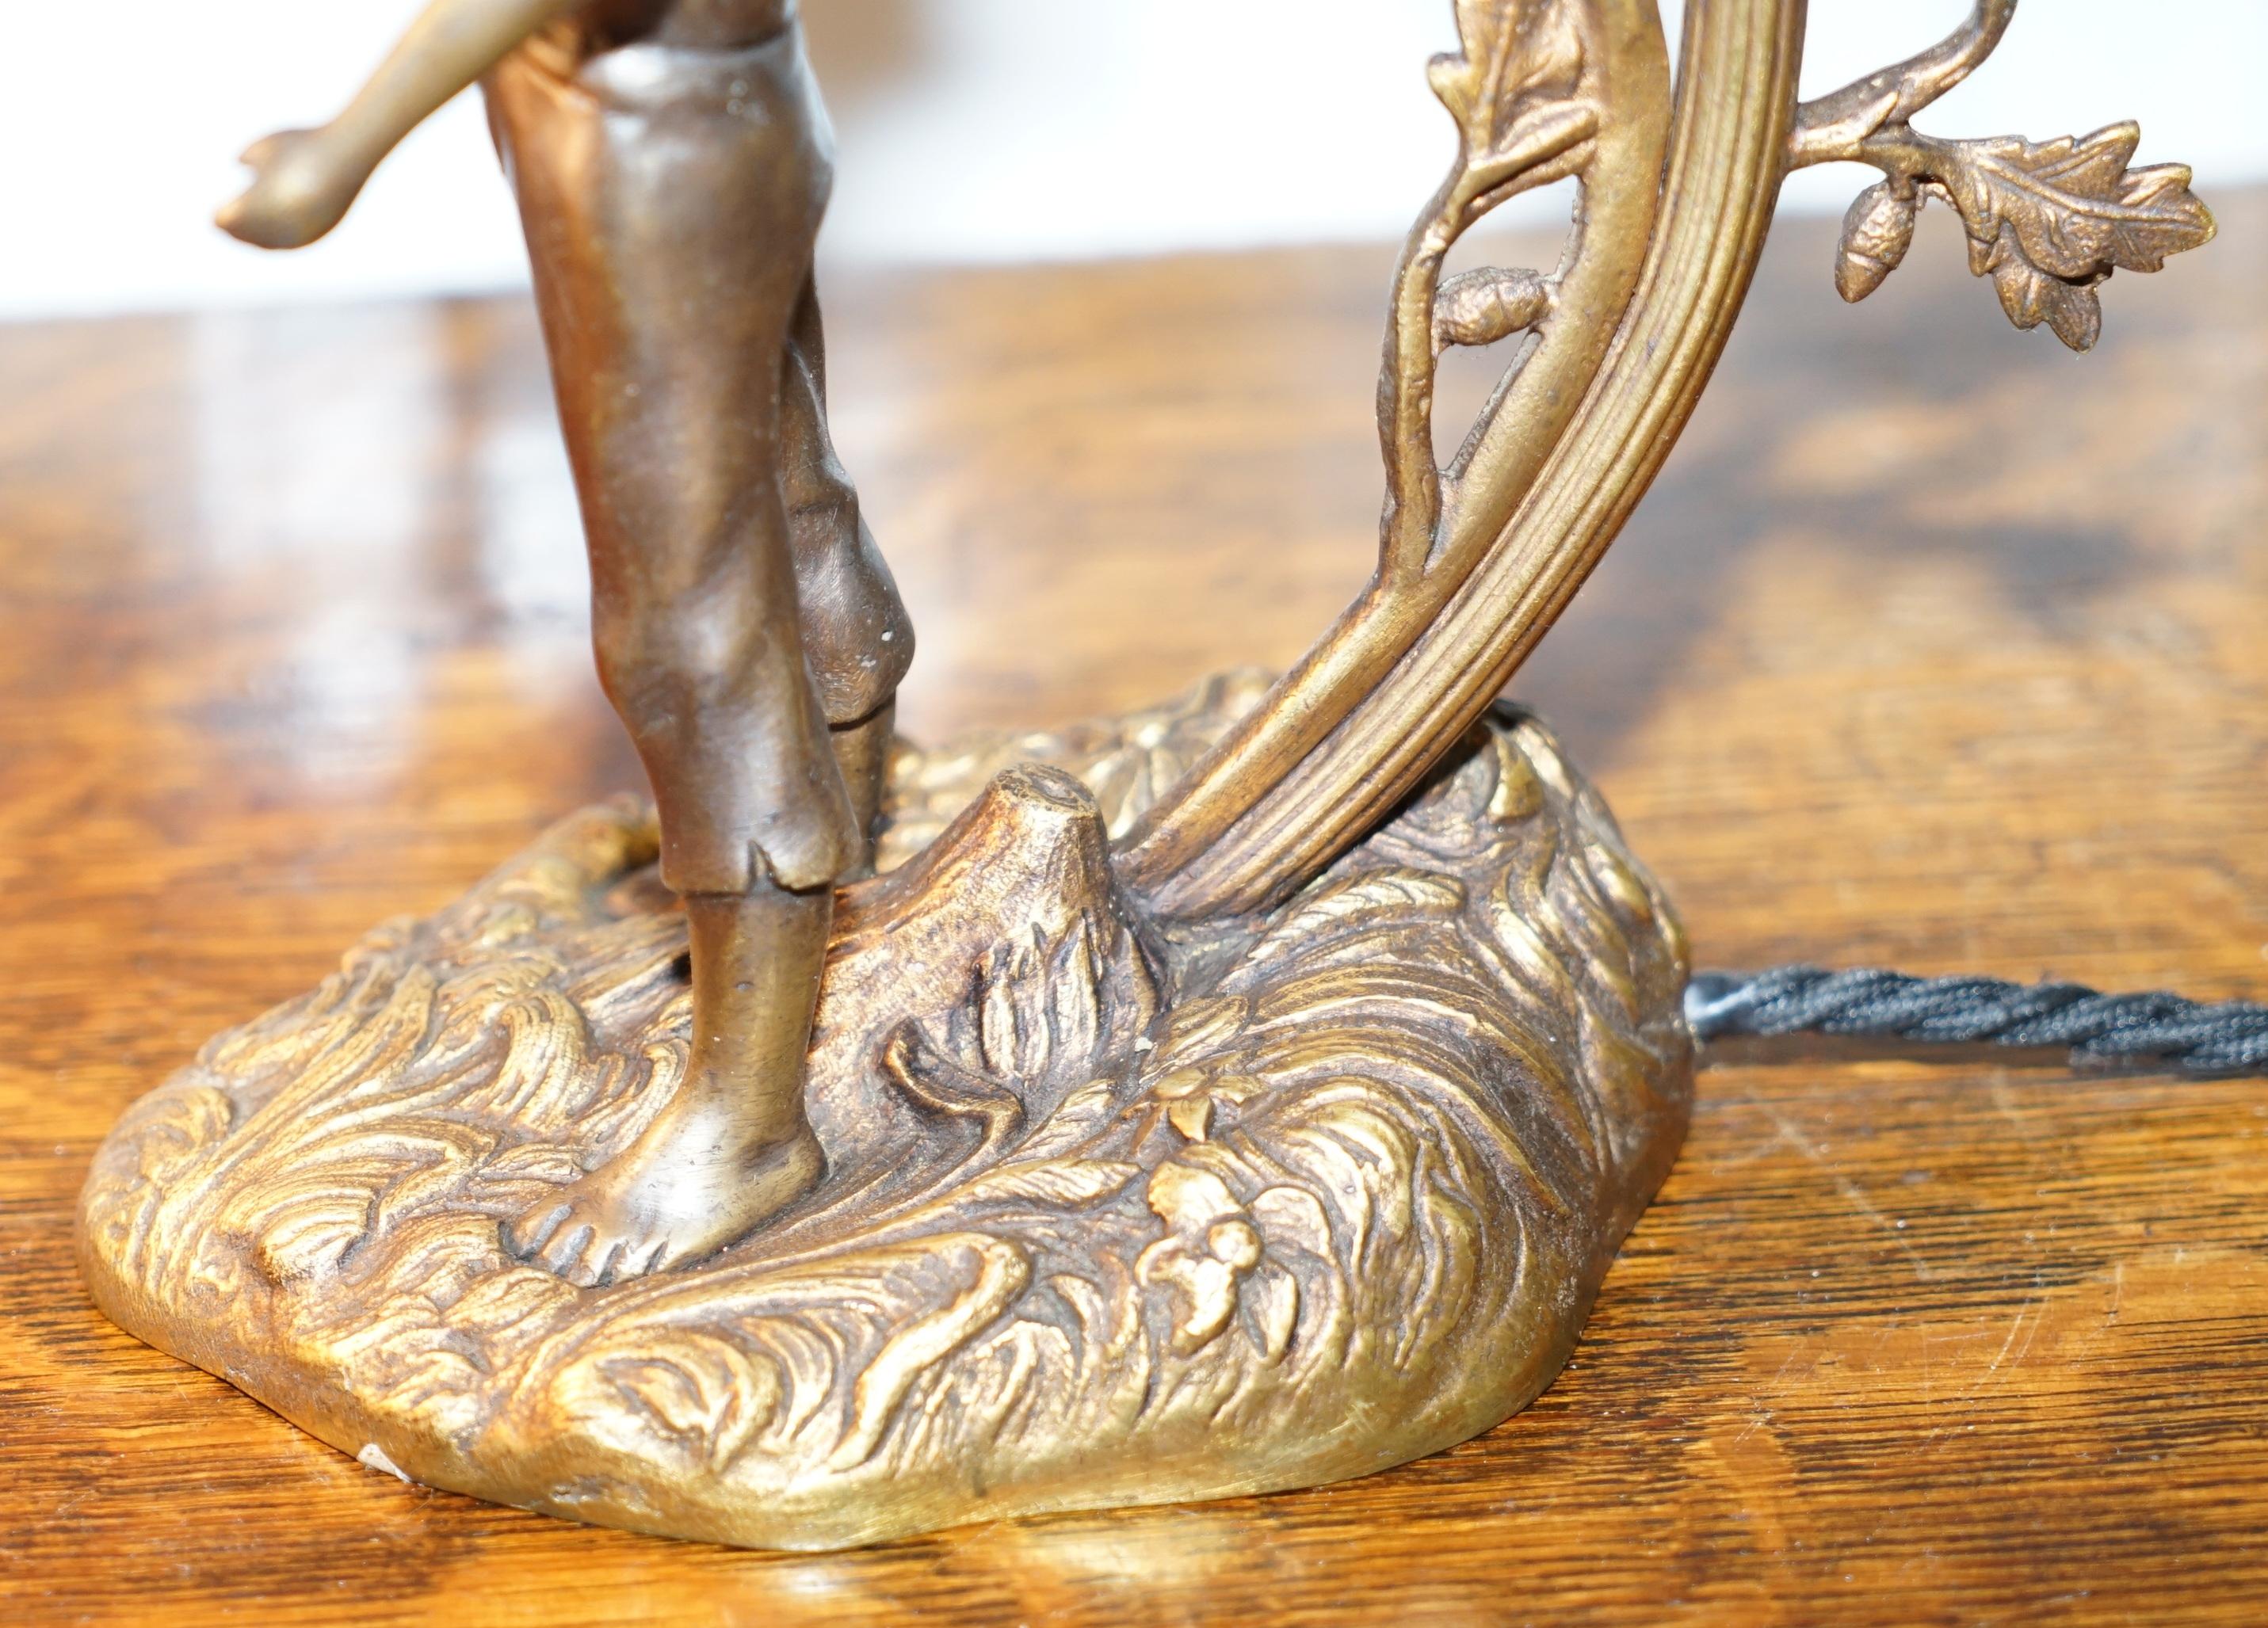 Stunning Solid Bronze circa 1920 Table Lamp with Statue Original Shade Rare Find 7